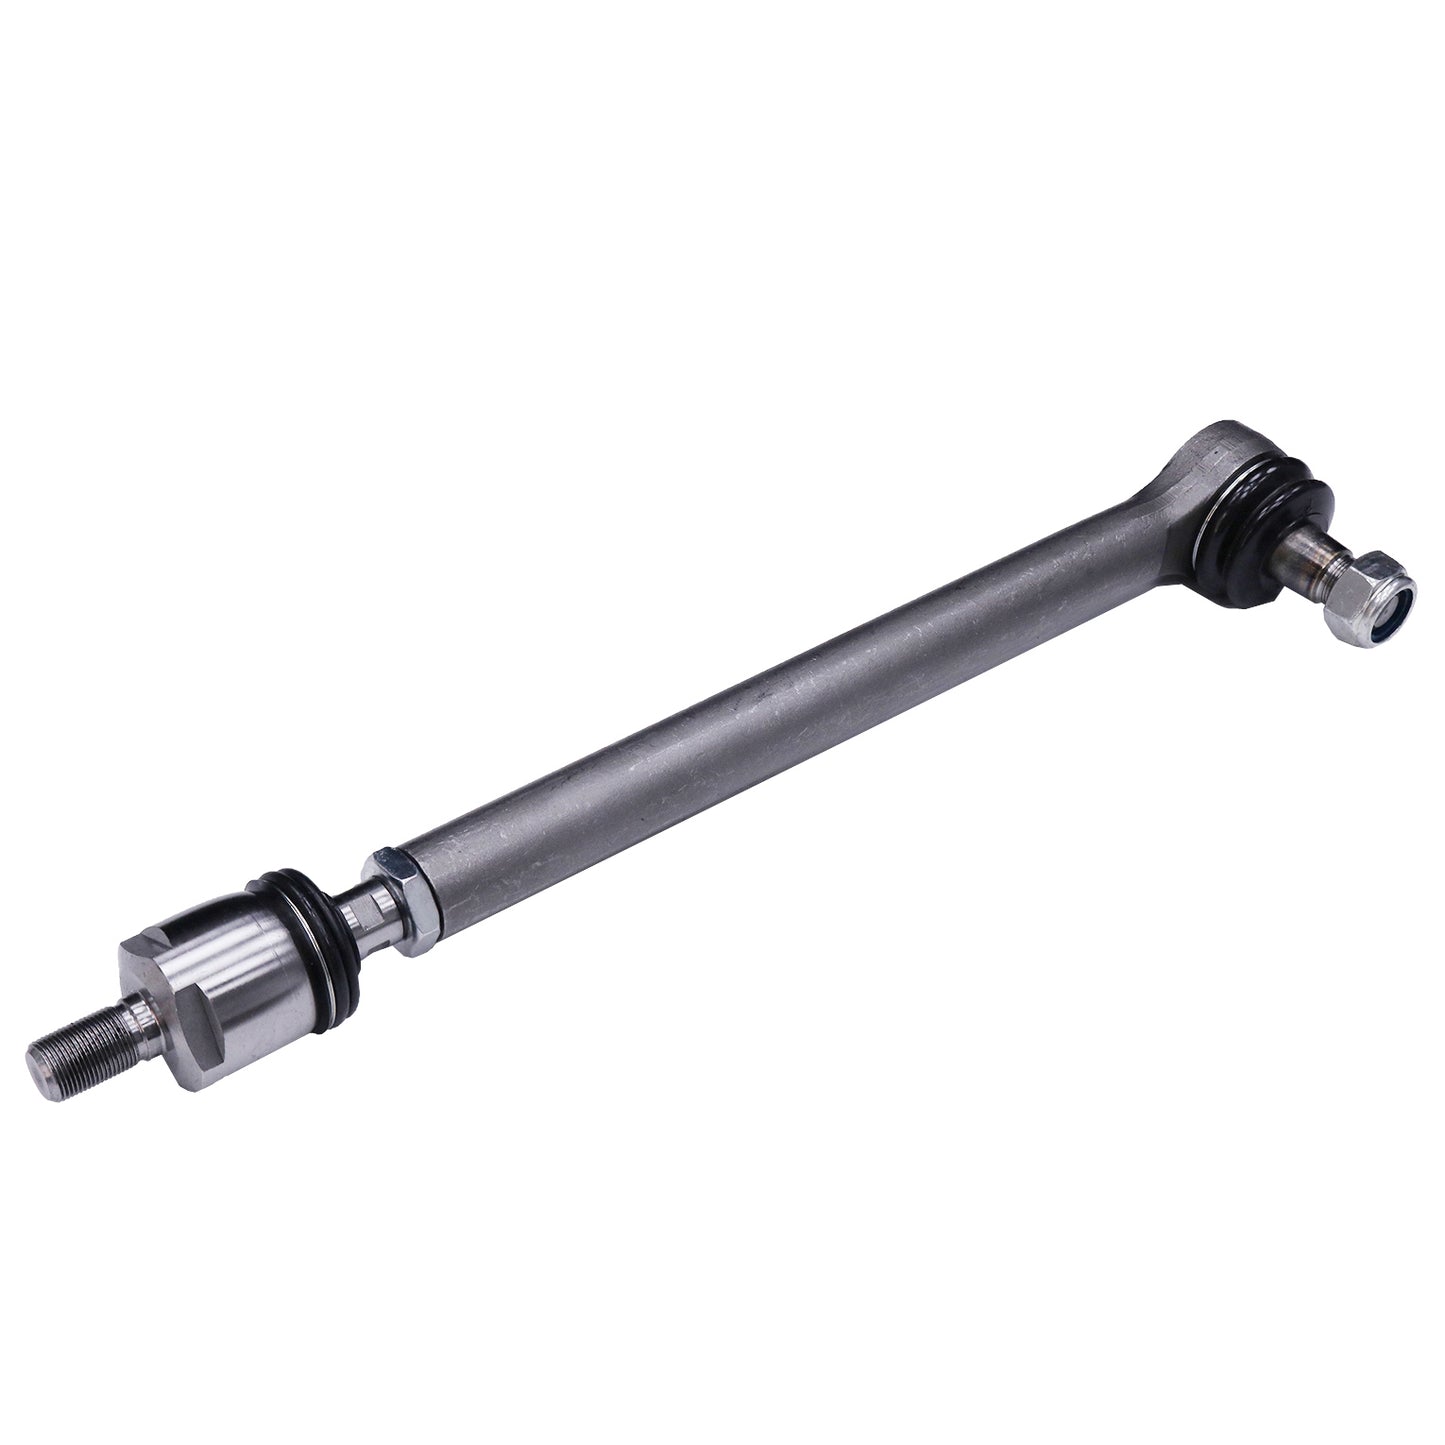 New 59194225 Articulating Tie Rod Compatible with Ingersoll Rand Skyjack VR-843 VR-843C VR-843E VR-636B VR-642B VR-642C VR-642E